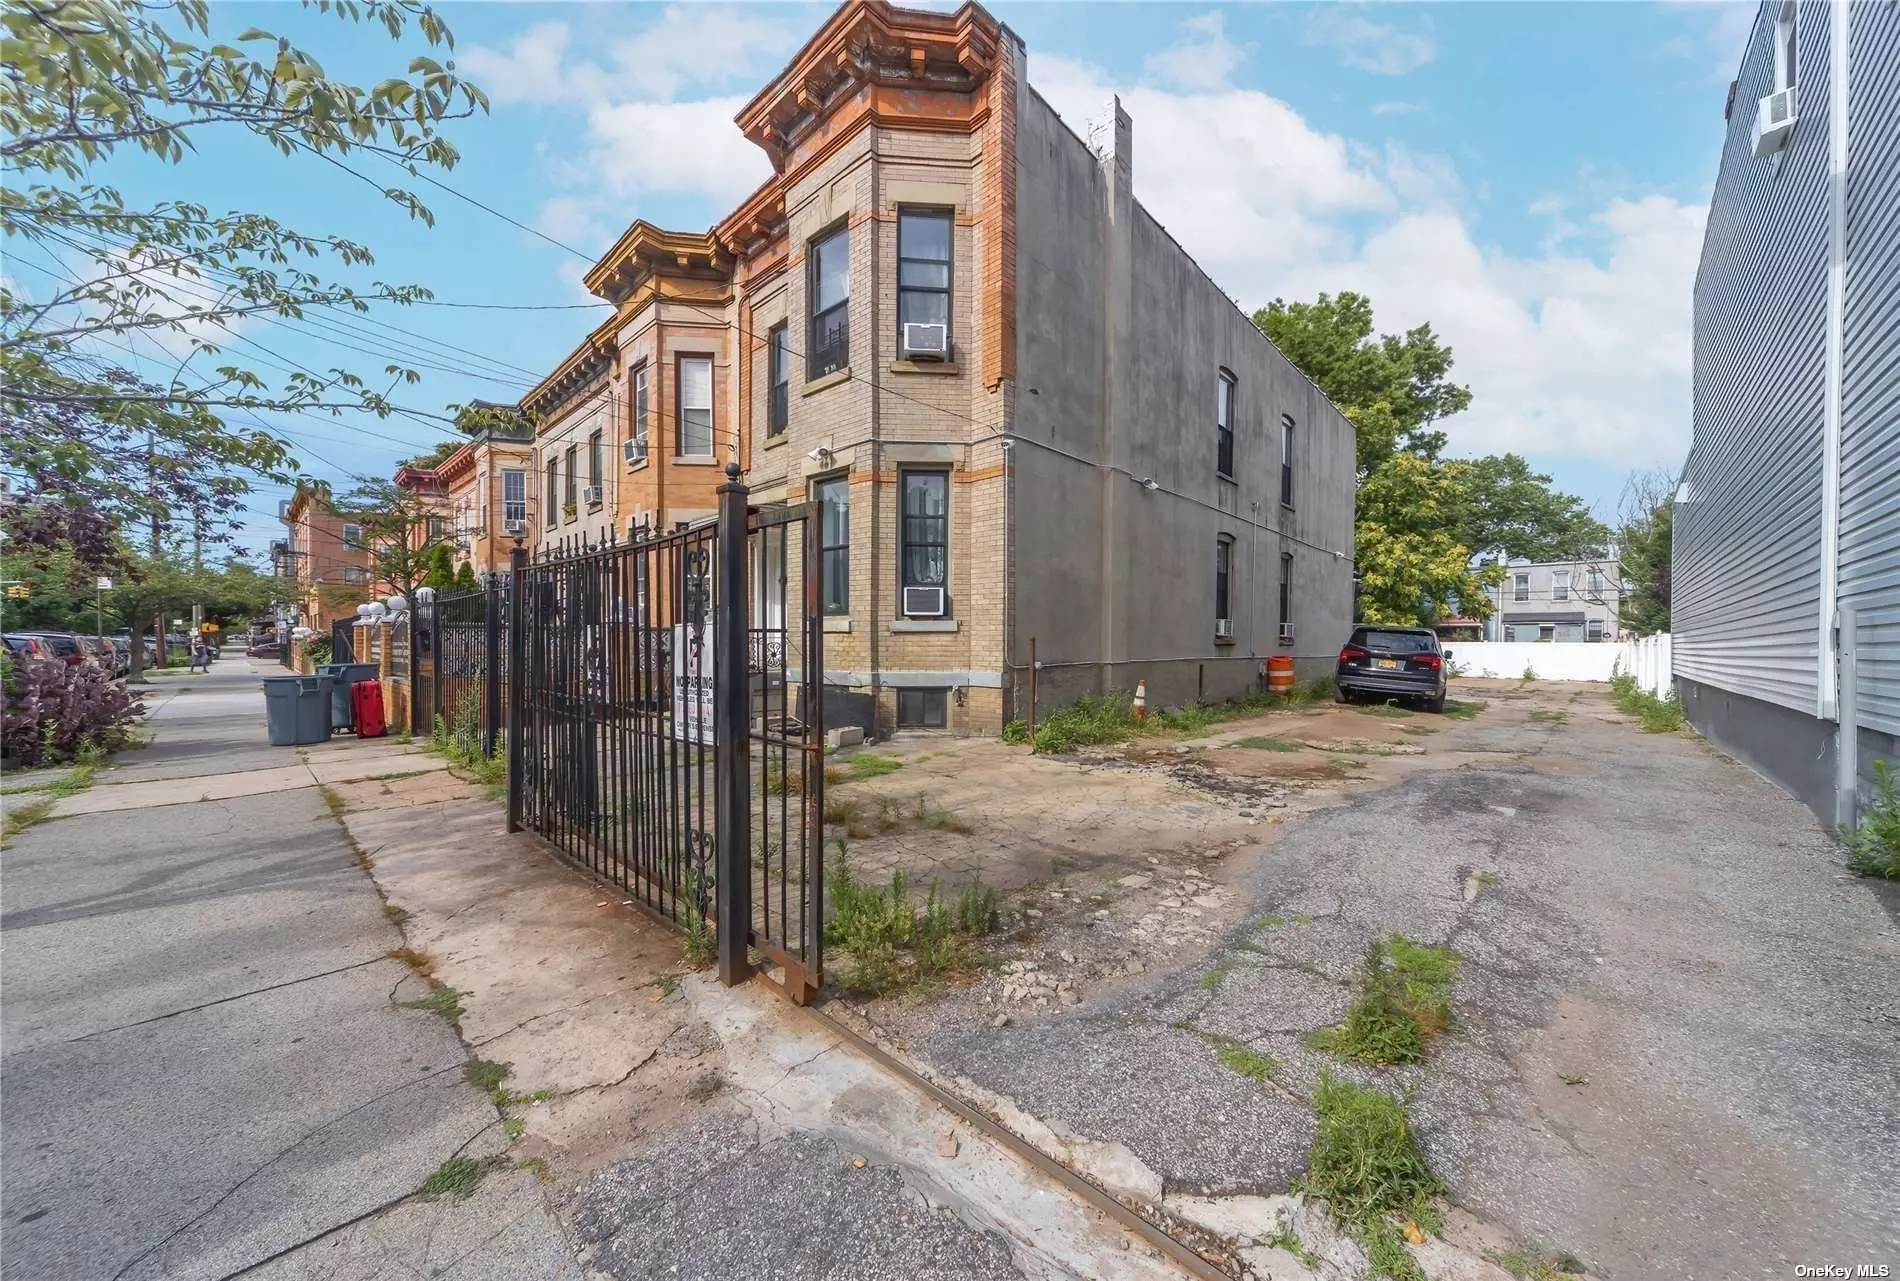 Mint condition. The property was fully renovated on 2016. It has PARKING for 9 CARS. Solid Brick 2 family home. Can be delivered vacant. Great income property.